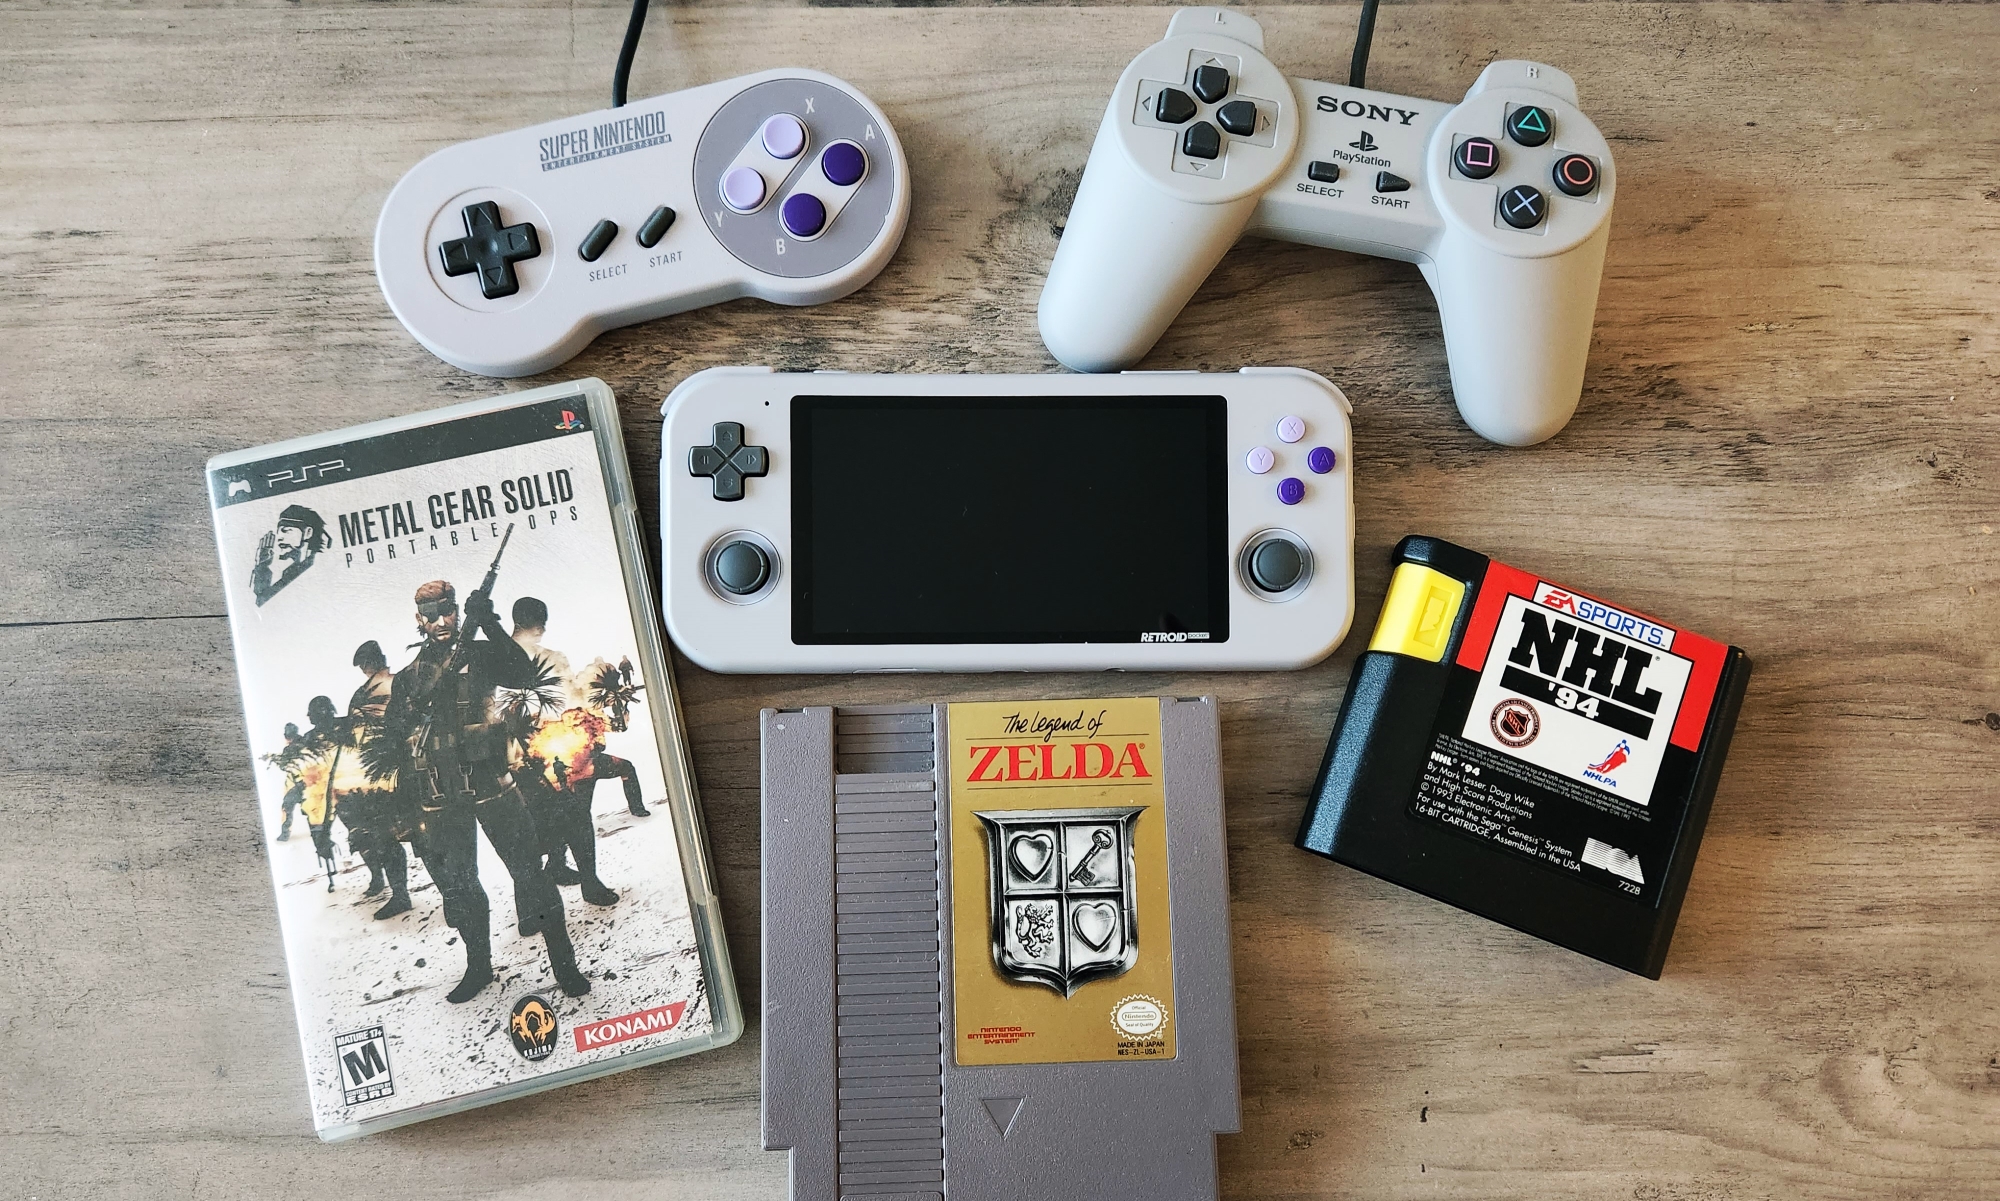 What we bought: The Retroid Pocket 3 is my own personal retro-game museum